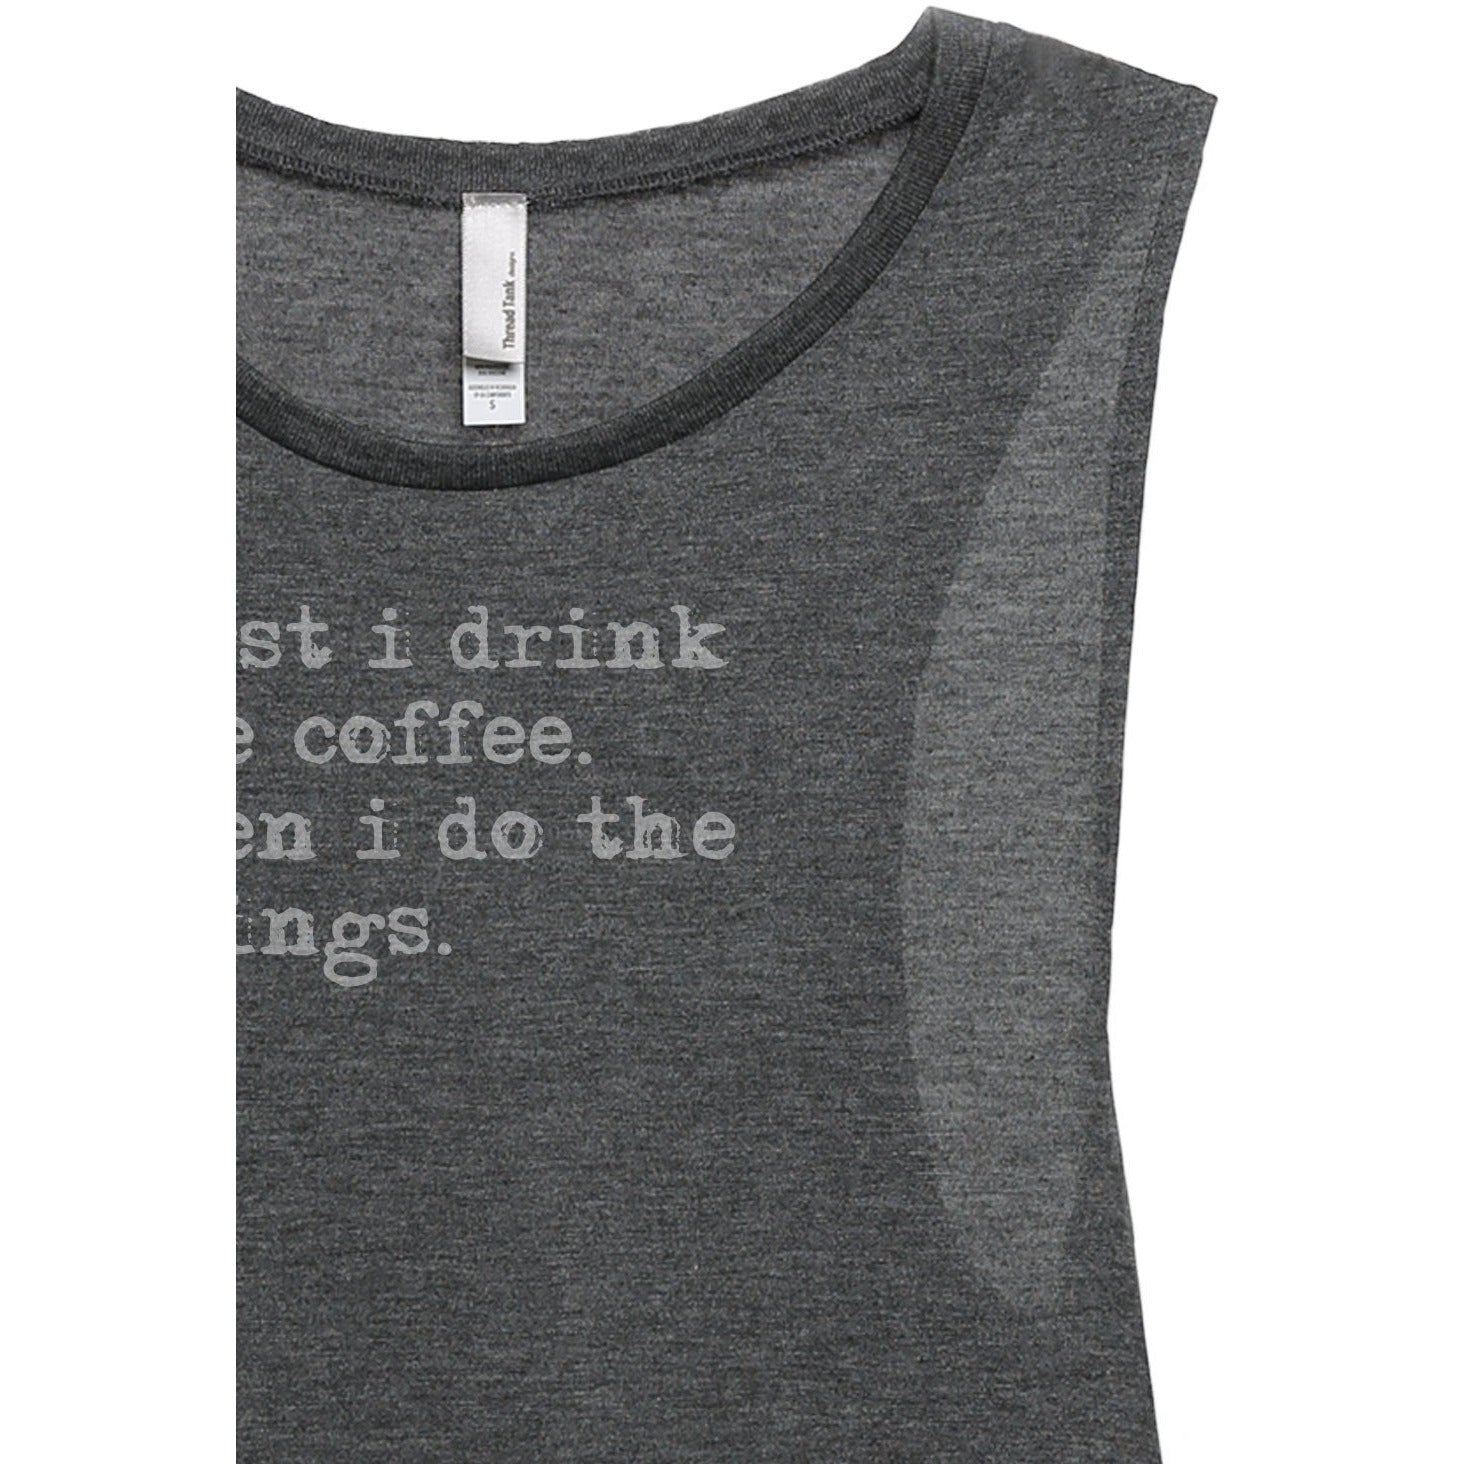 First I Drink The Coffee Then I Do The Things Women's Relaxed Muscle Tank Tee Charcoal Closeup Details
